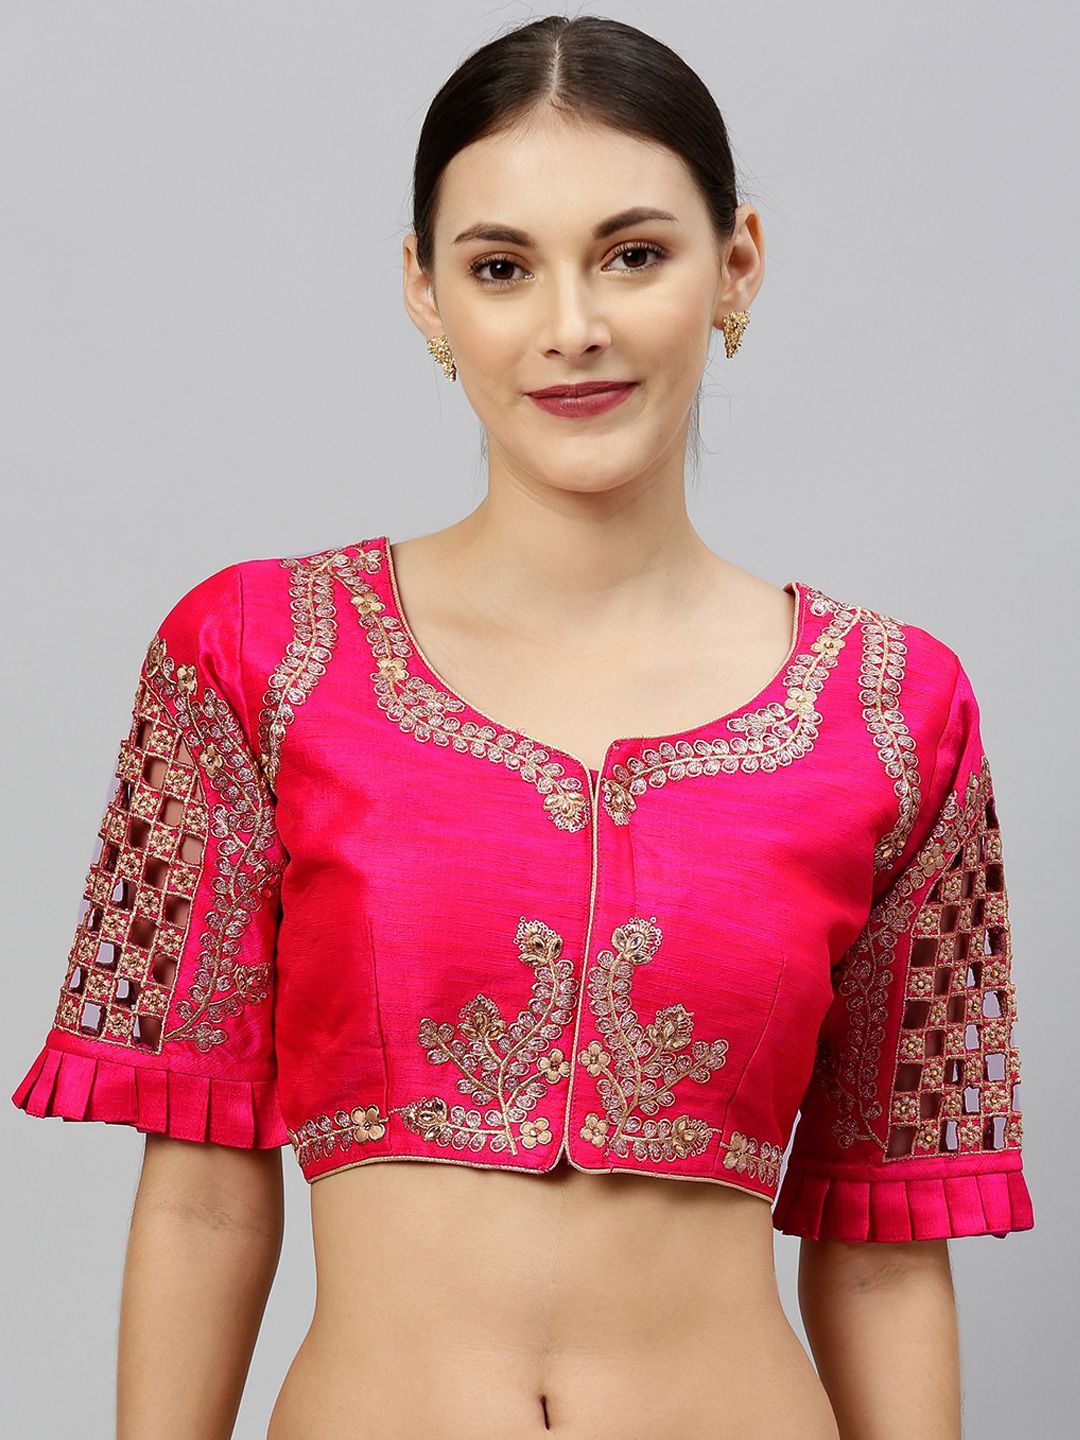 Fab Viva Pink & Gold-Coloured Embroidered Saree Blouse Price in India